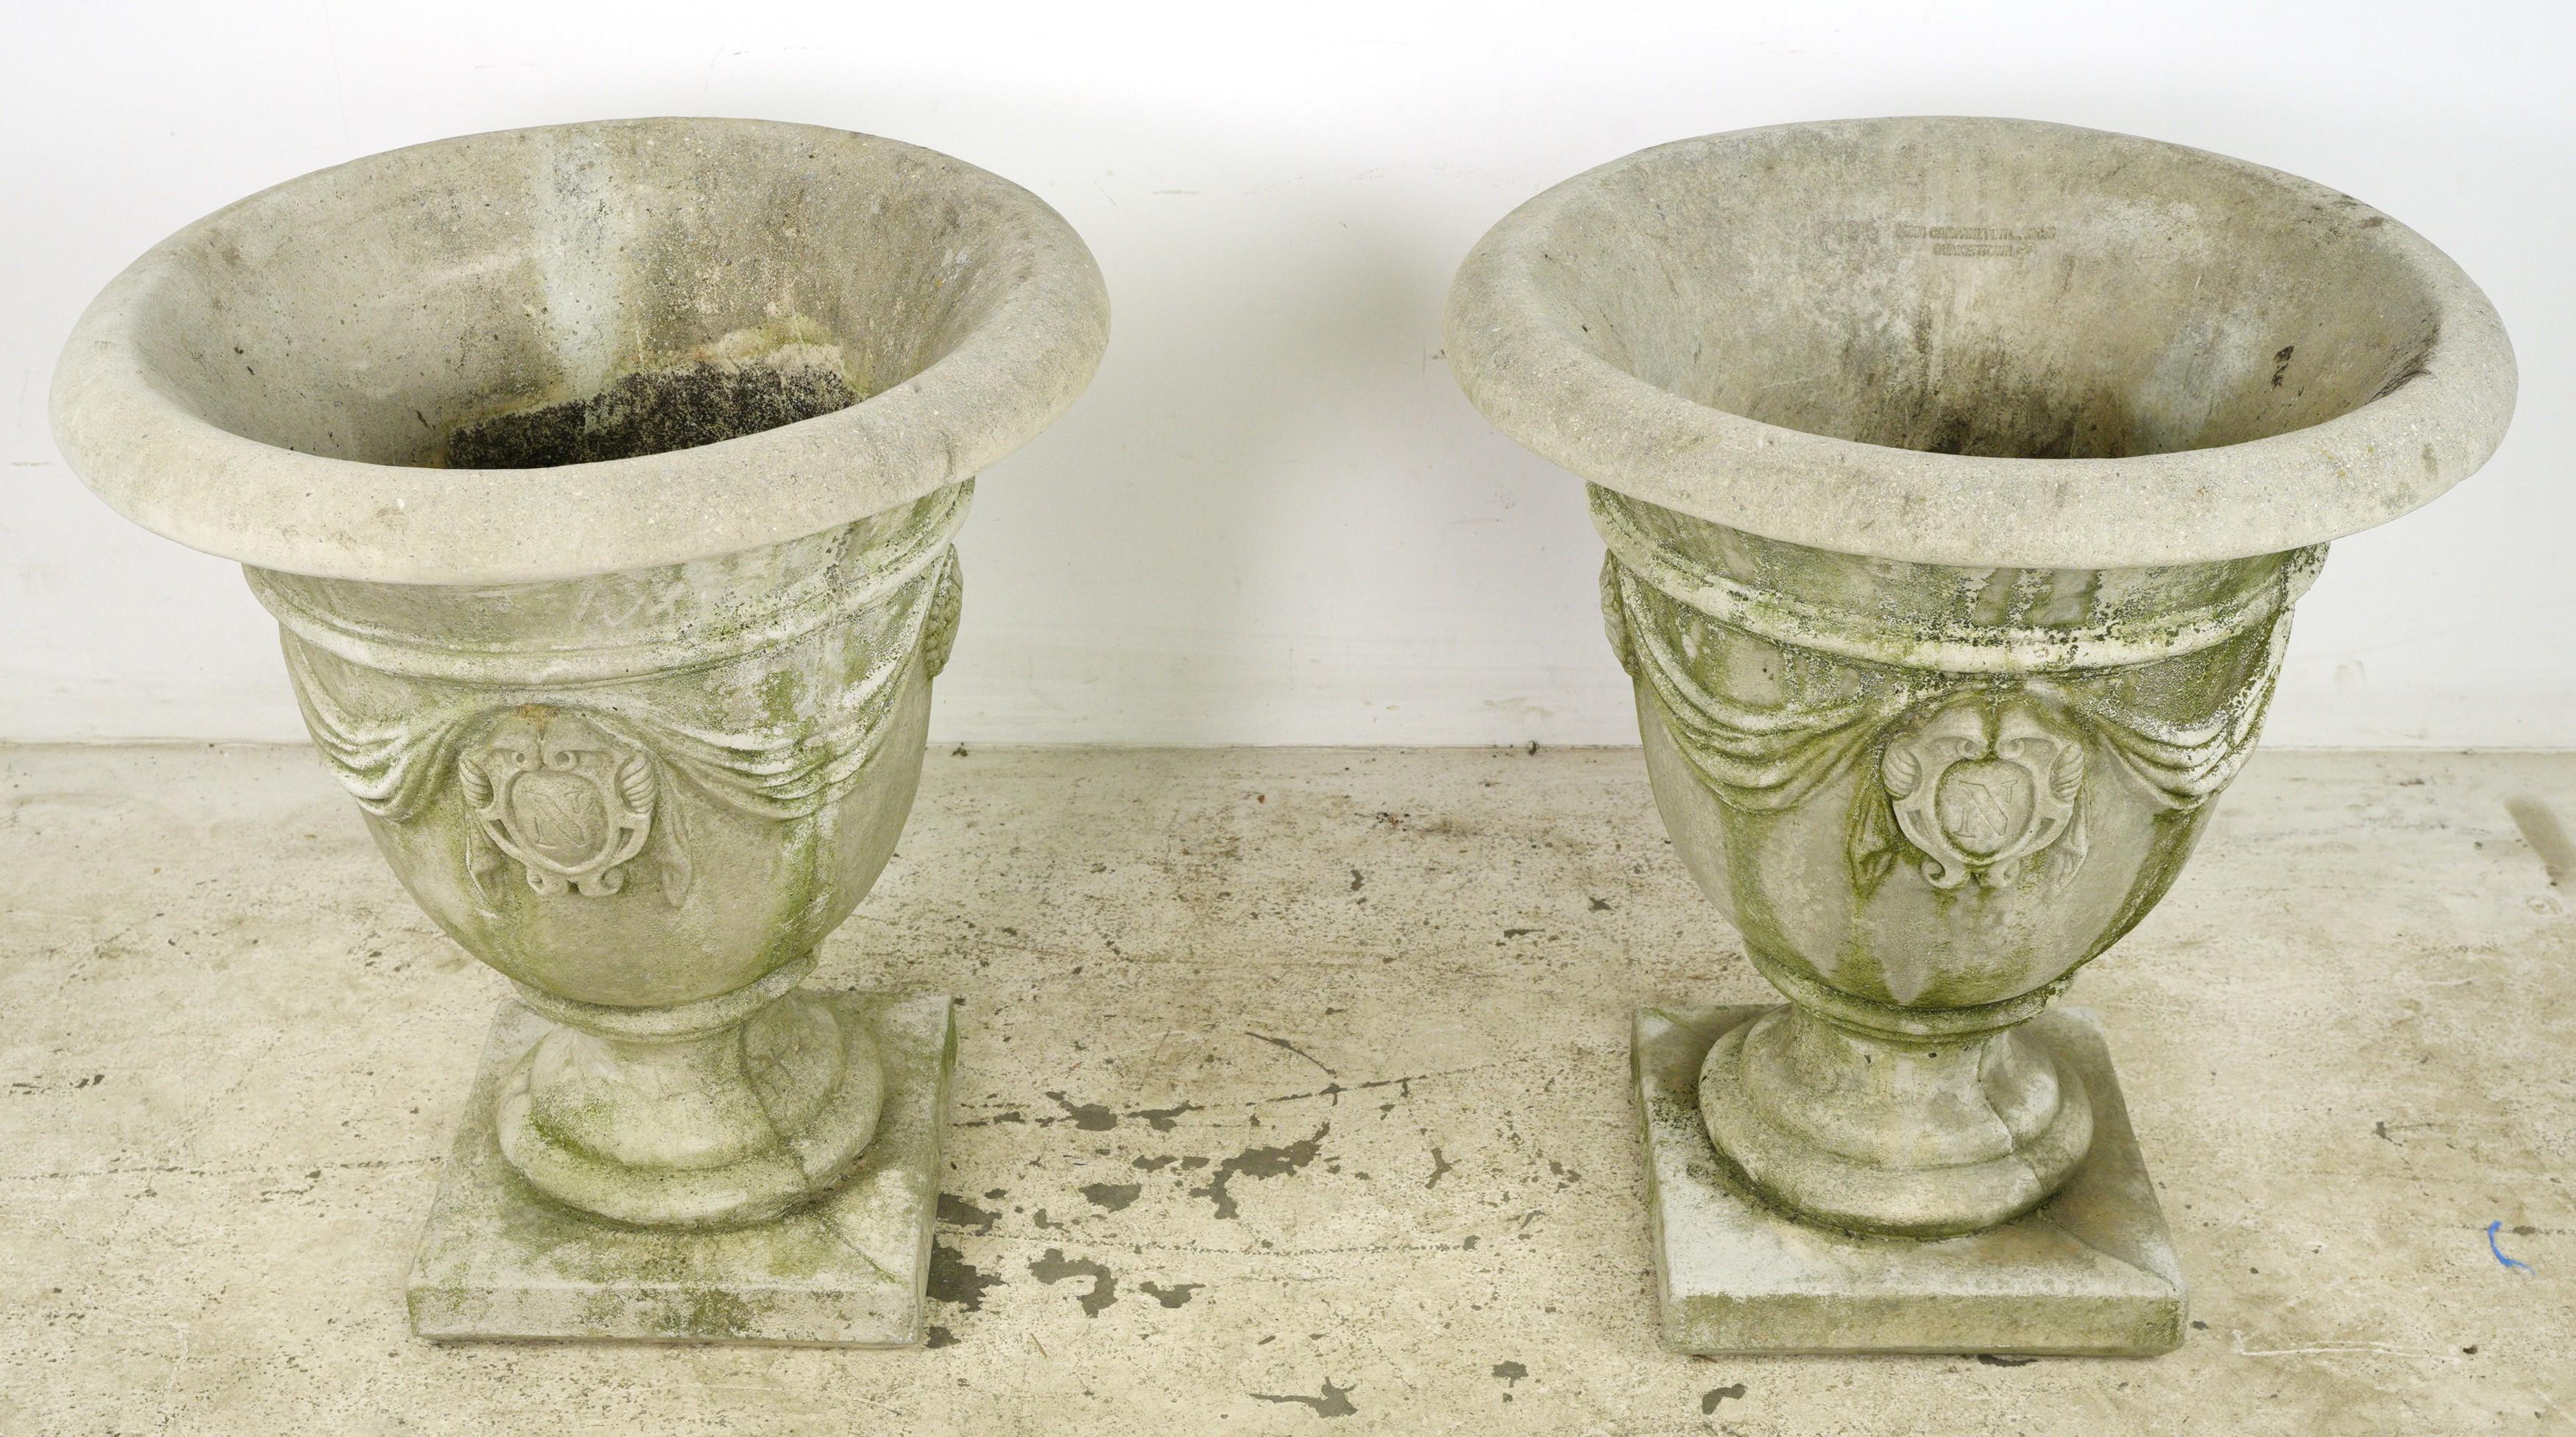 This pair of urns weere collected from an estate located in Greenwich, Connecticut. These planters feature an urn shaped design. The drapery detailing enhances the visual appeal, making them stand out as emblematic pieces. 
Whether planted with